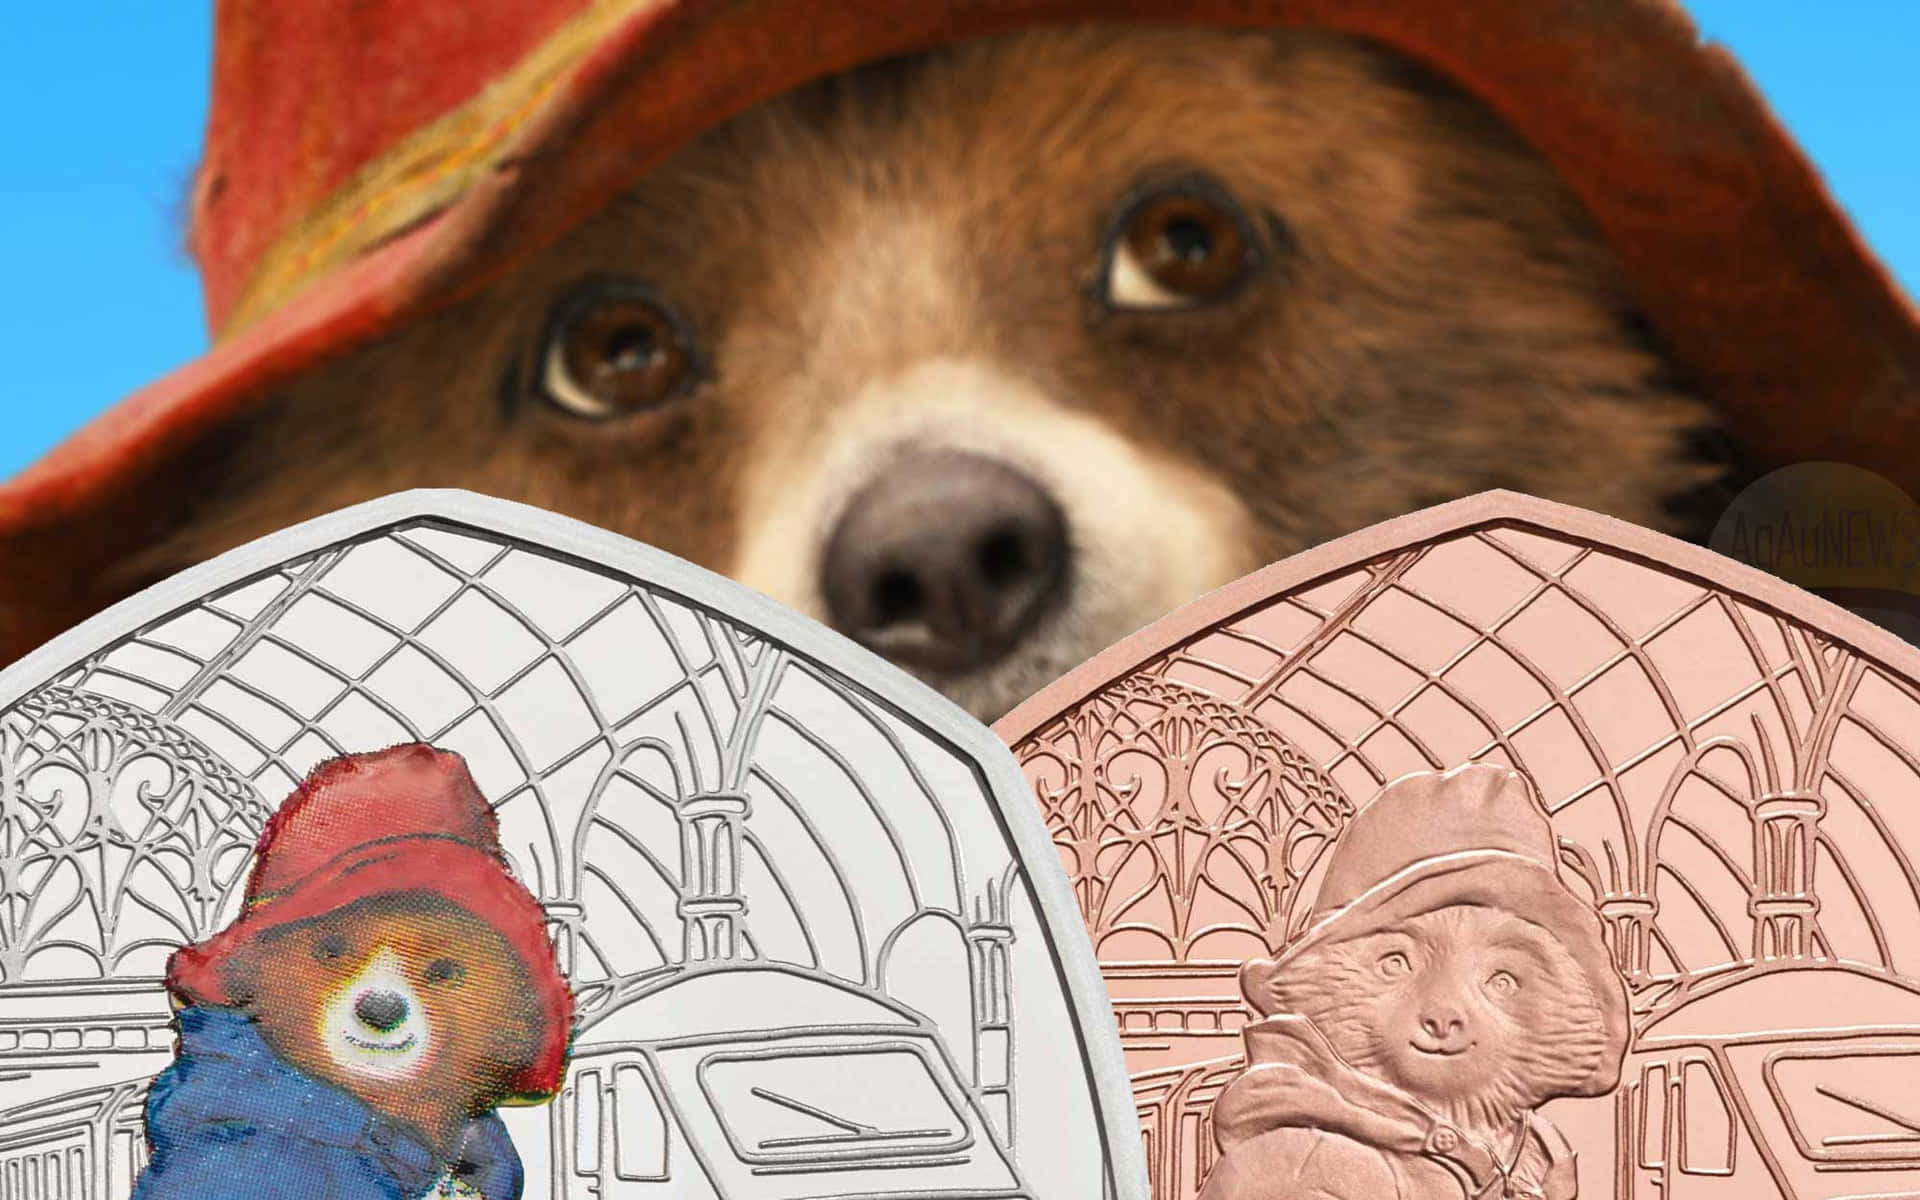 "paddington Bear With His Famous Red Hat" Wallpaper